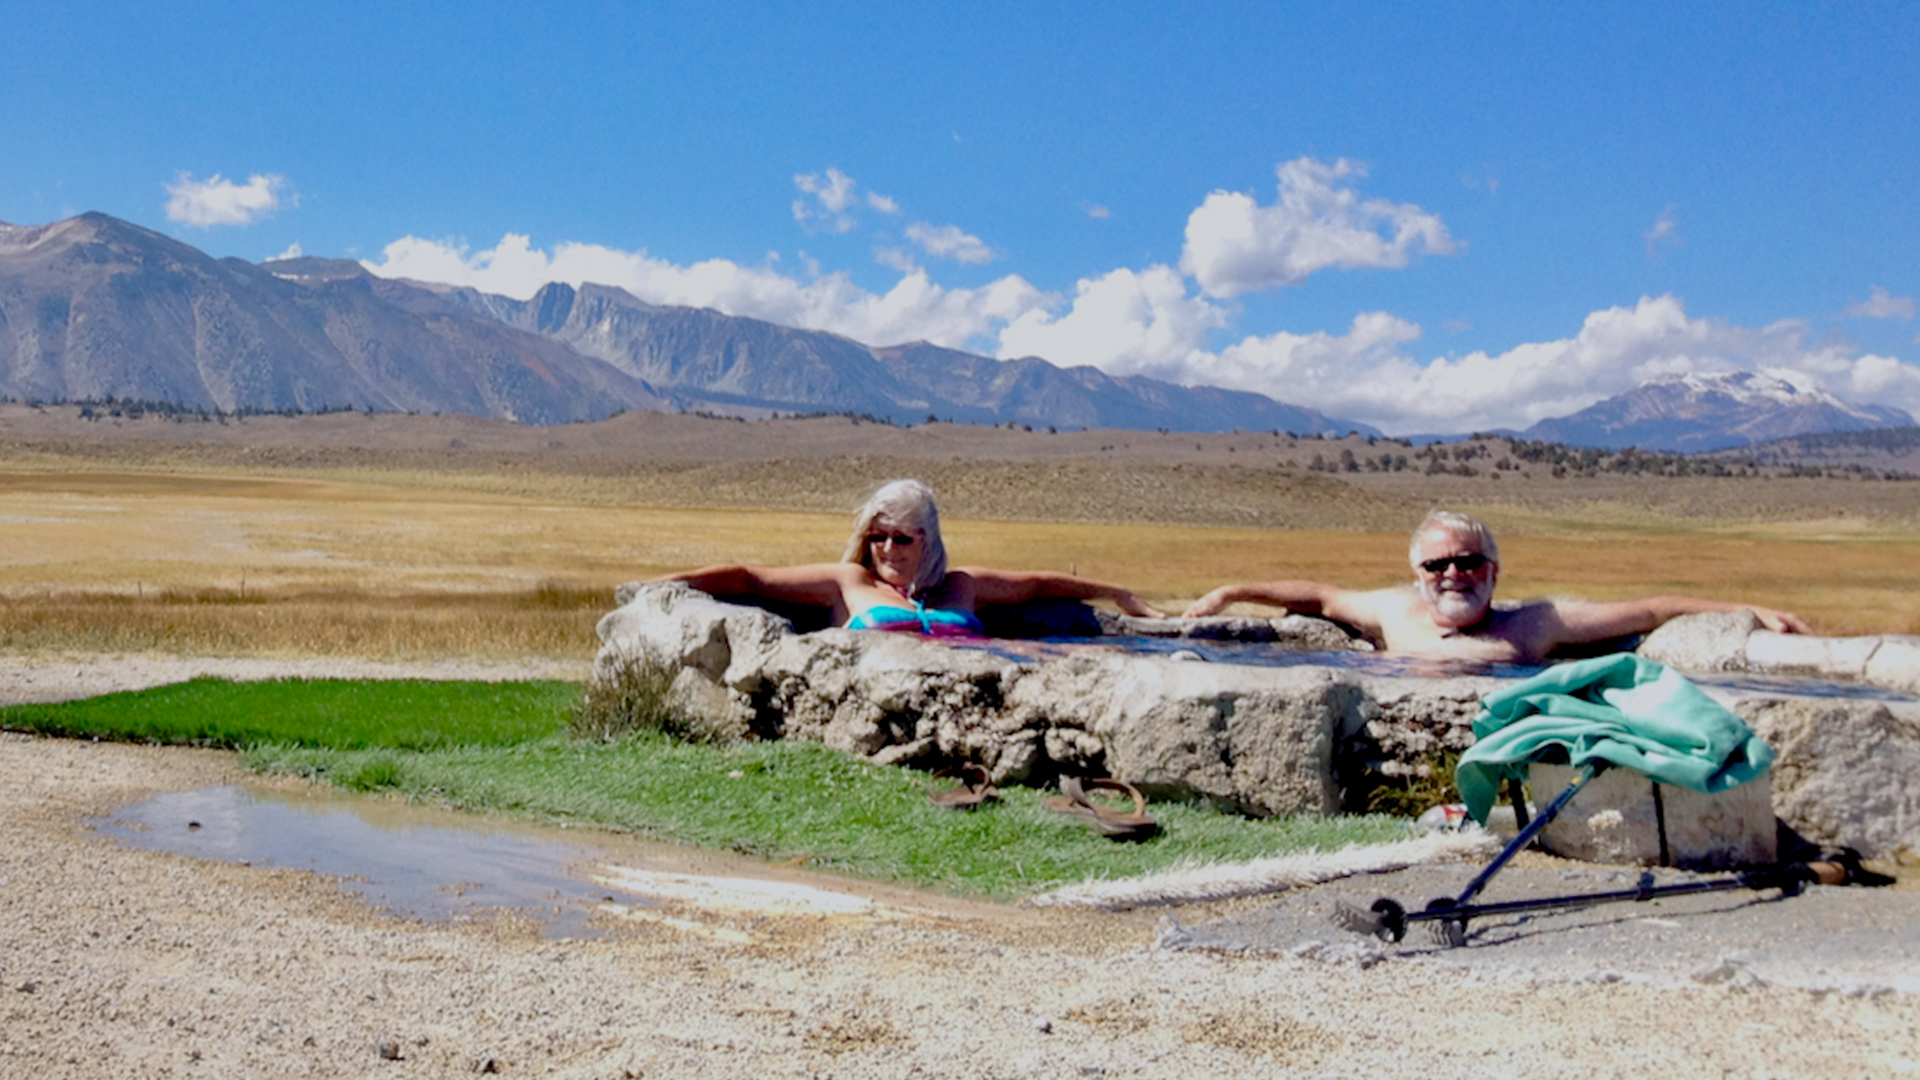 Jim and Carmen sitting in a hot spring